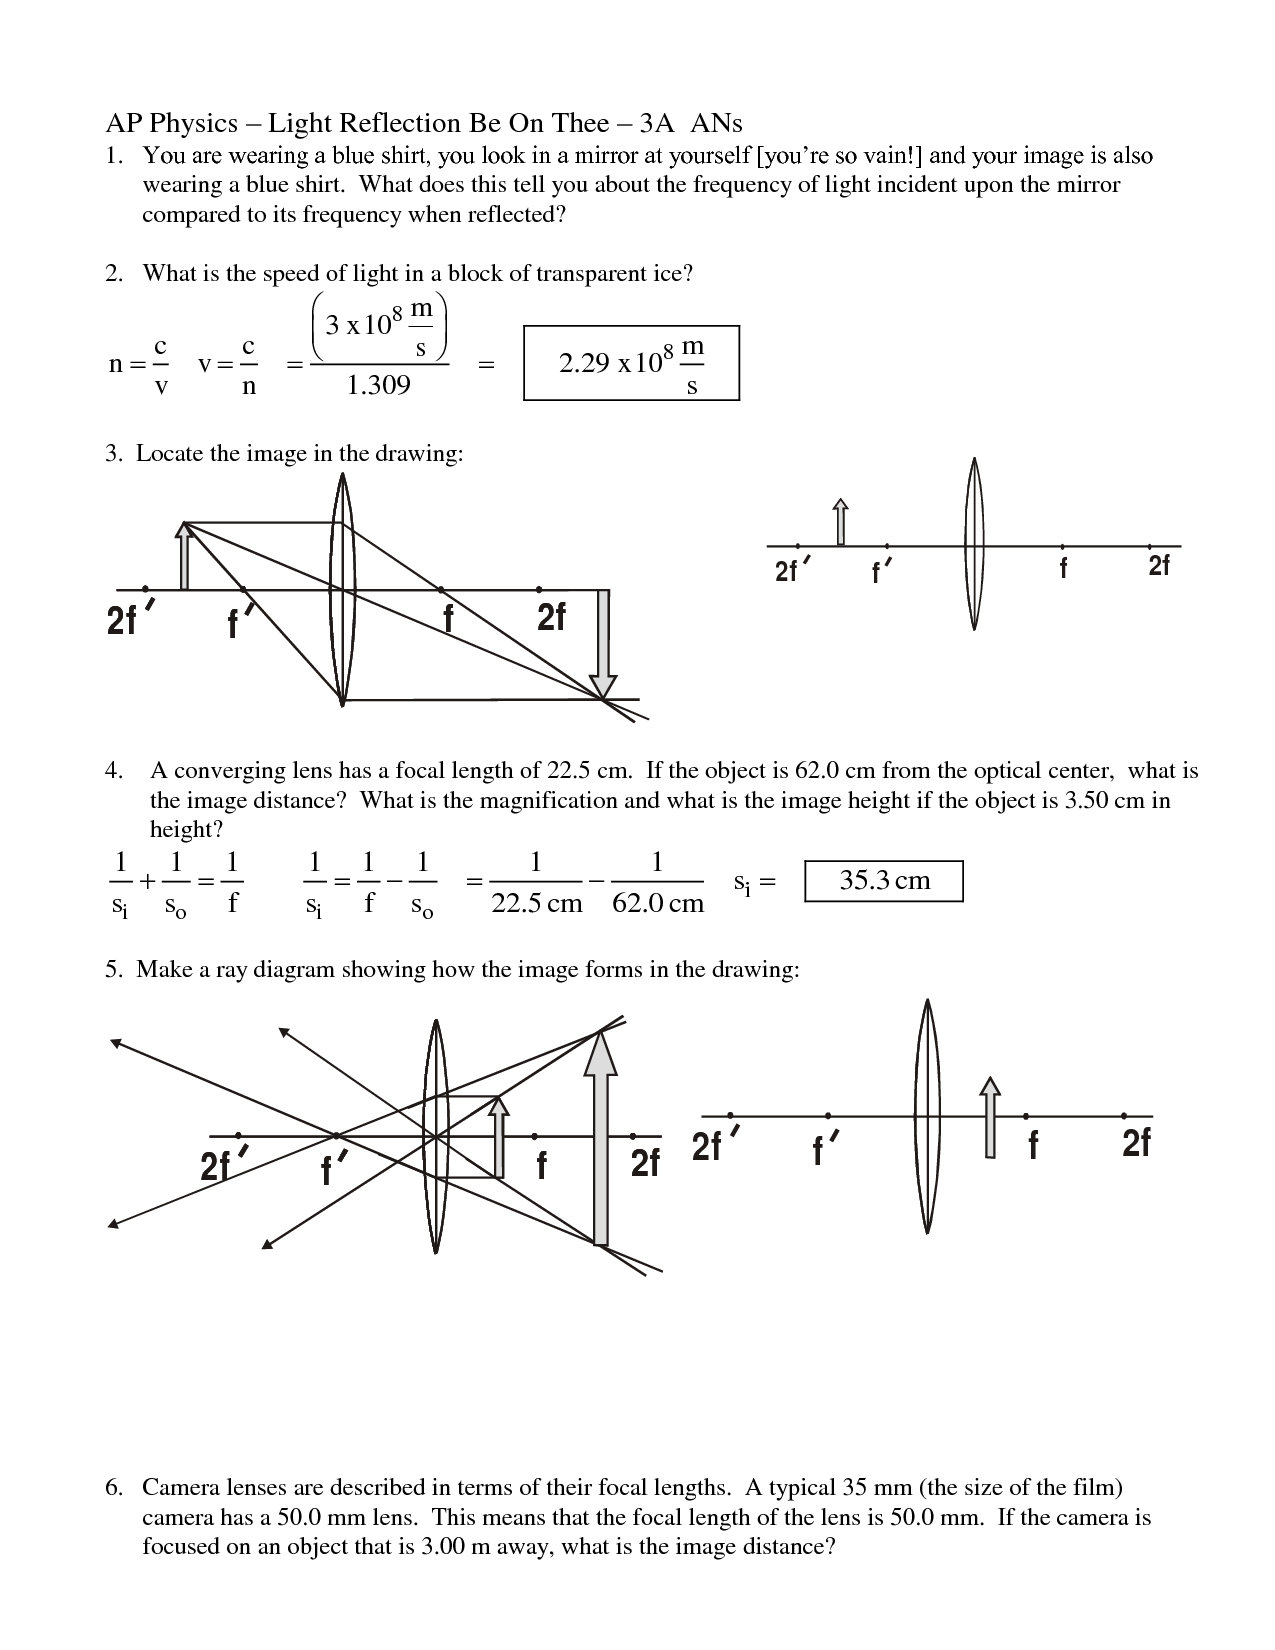 16-best-images-of-light-reflection-and-refraction-worksheet-pdf-light-reflection-and